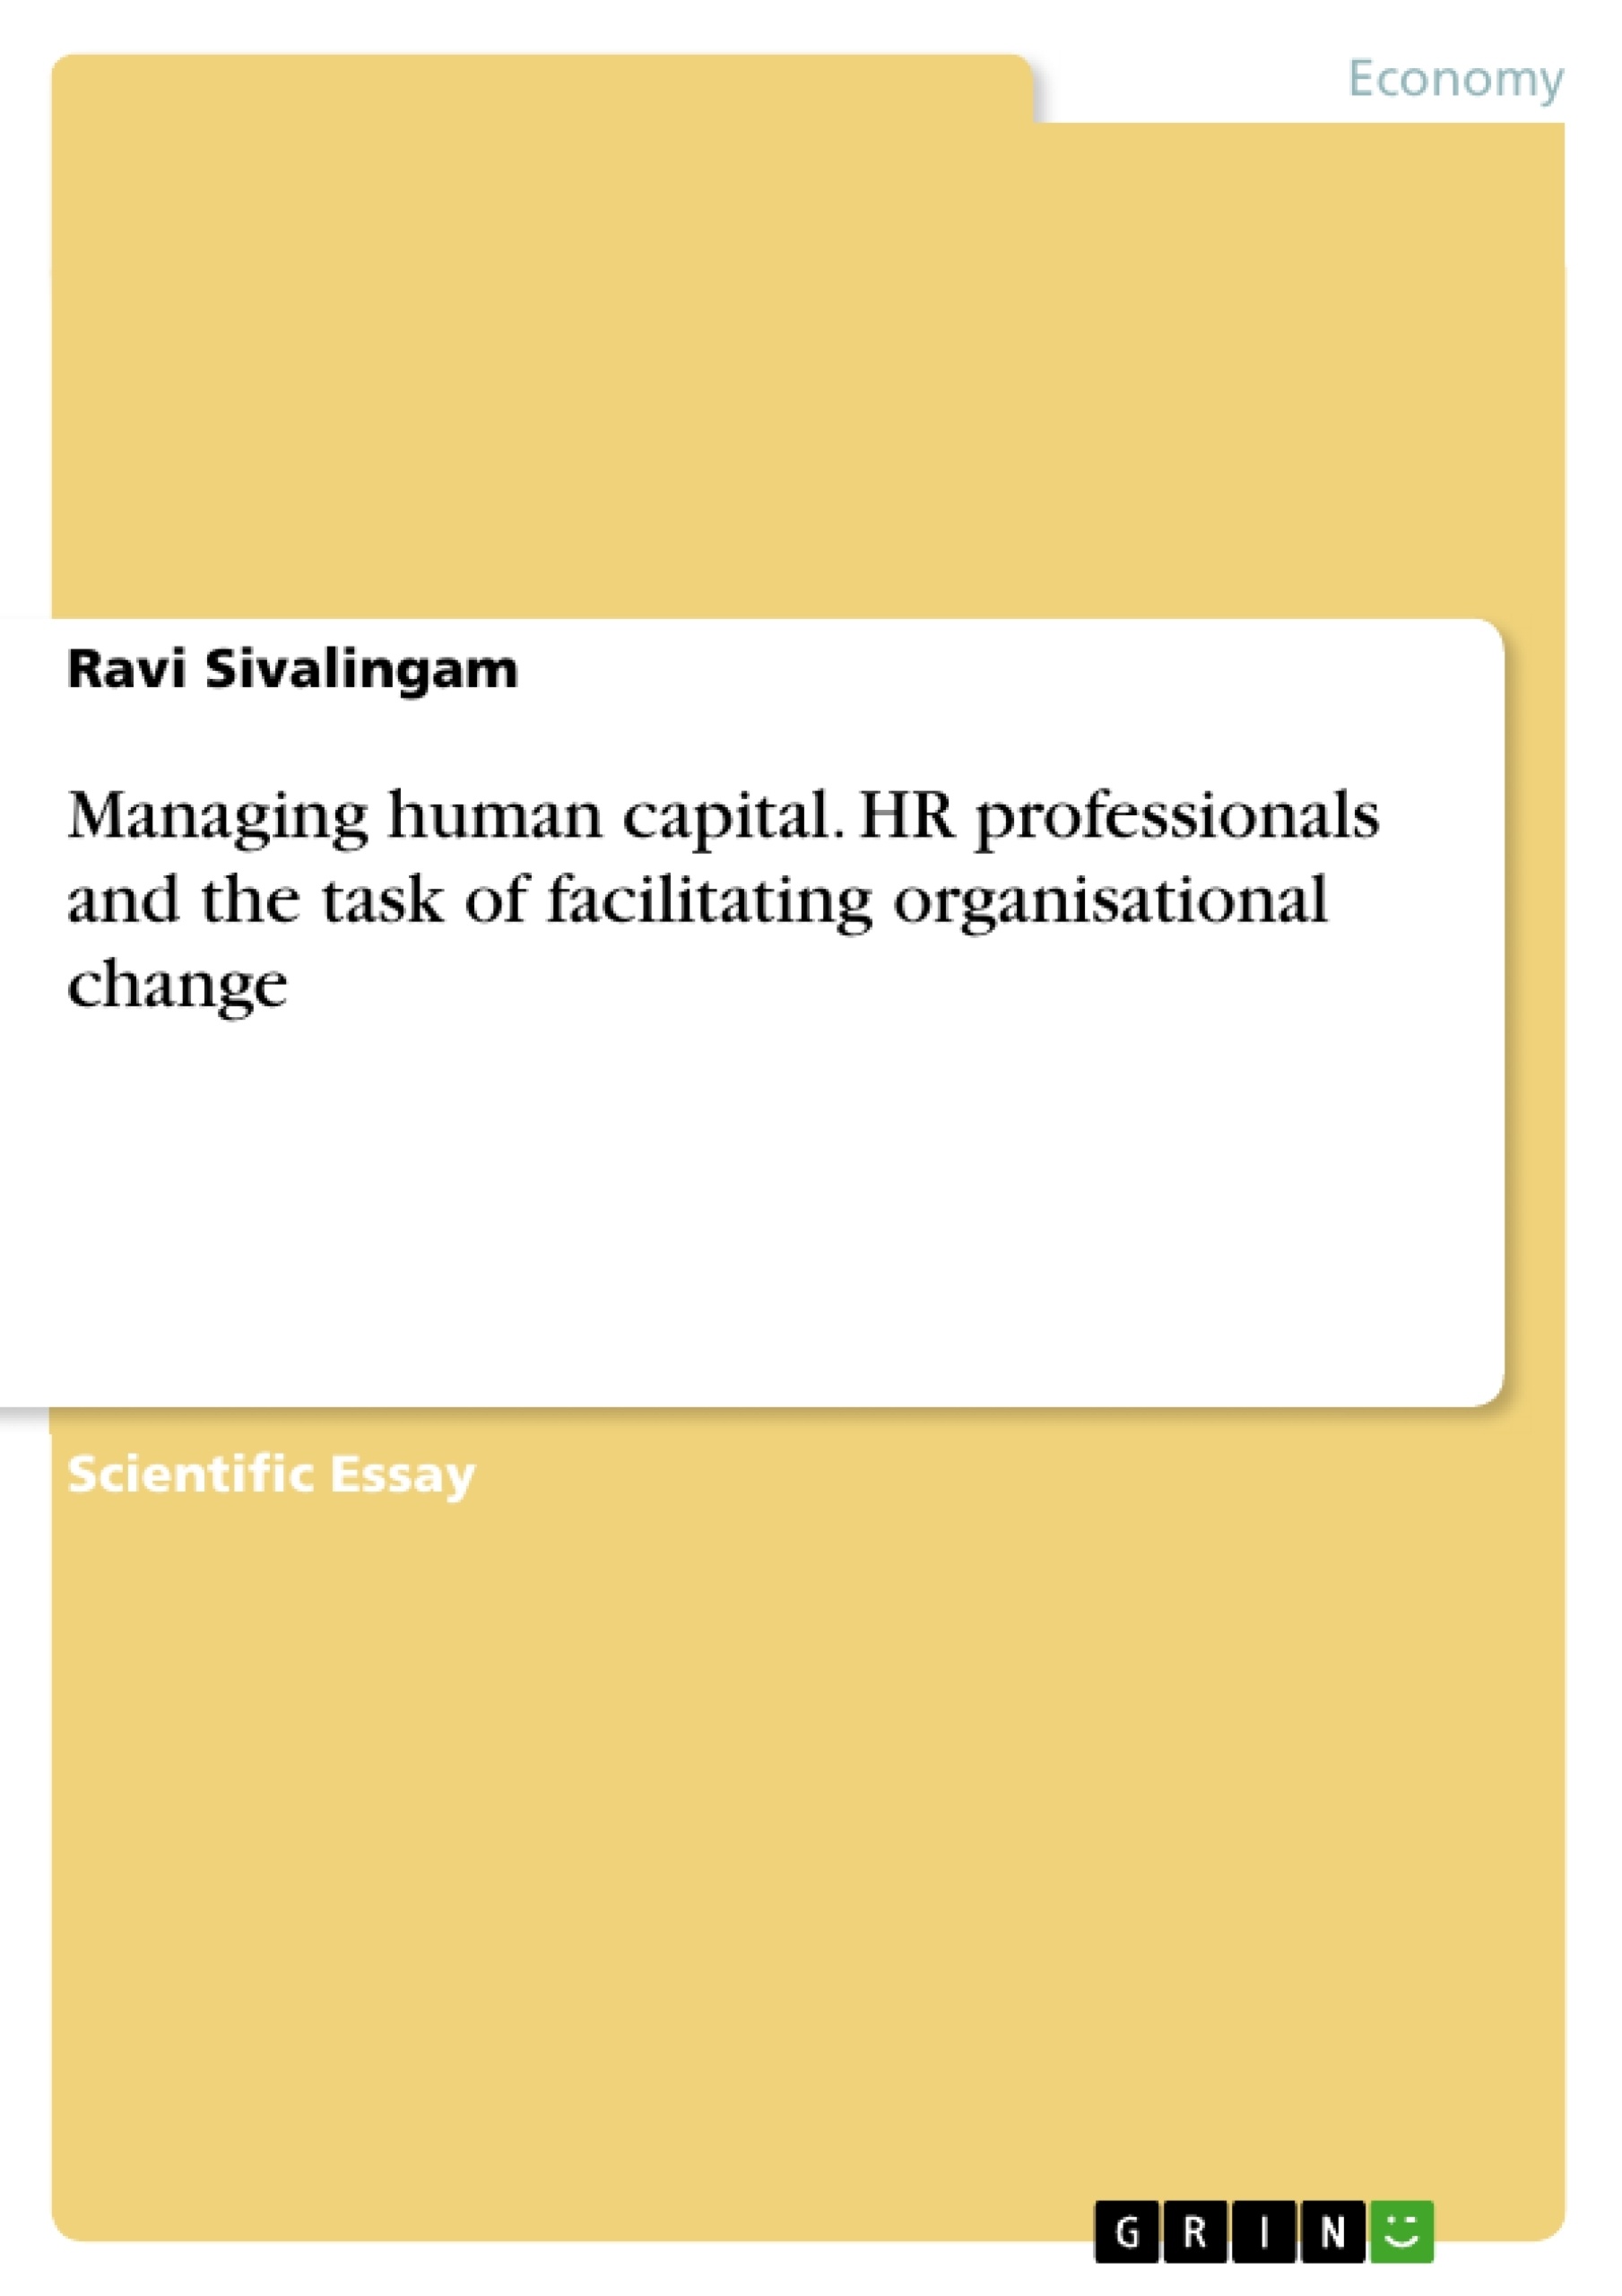 Title: Managing human capital. HR professionals and the task of facilitating organisational change